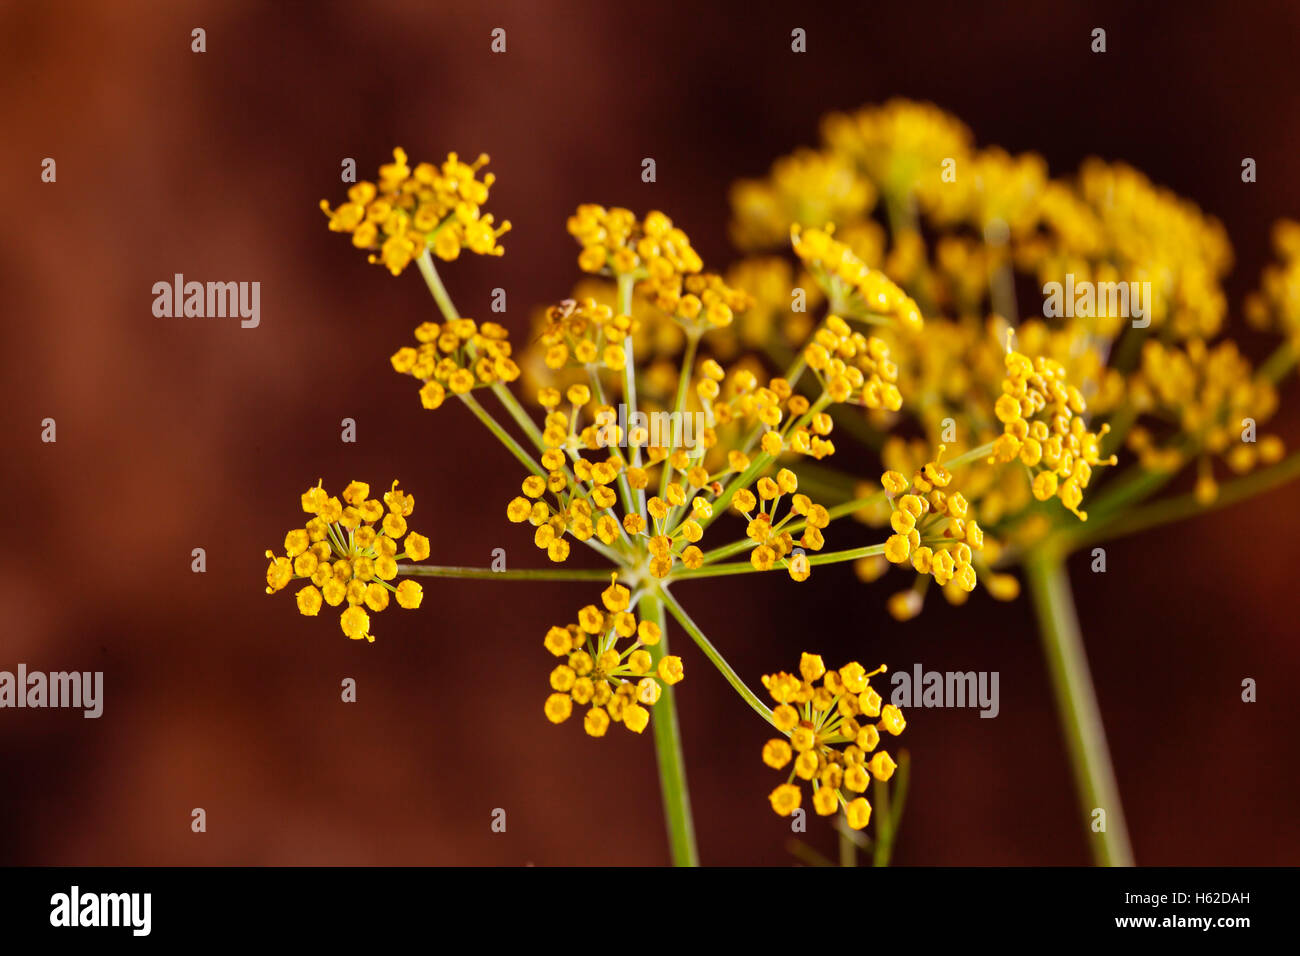 Yellow fennel umbels Stock Photo